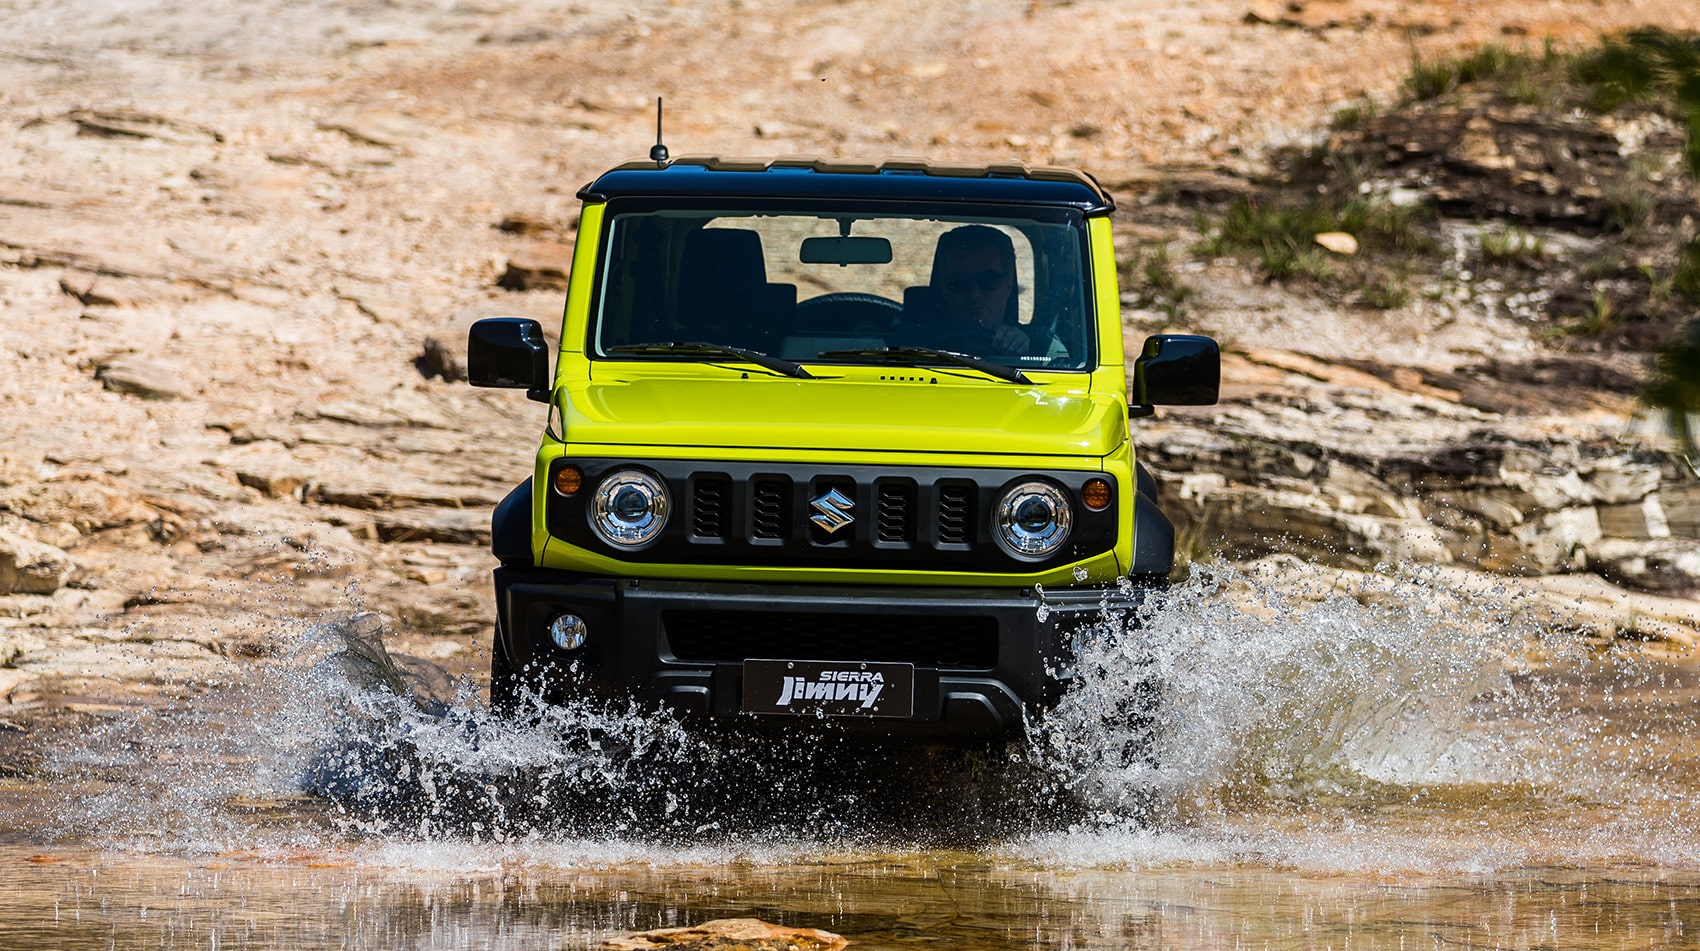 Suzuki Jimny production starts in India: Europe will continue without it